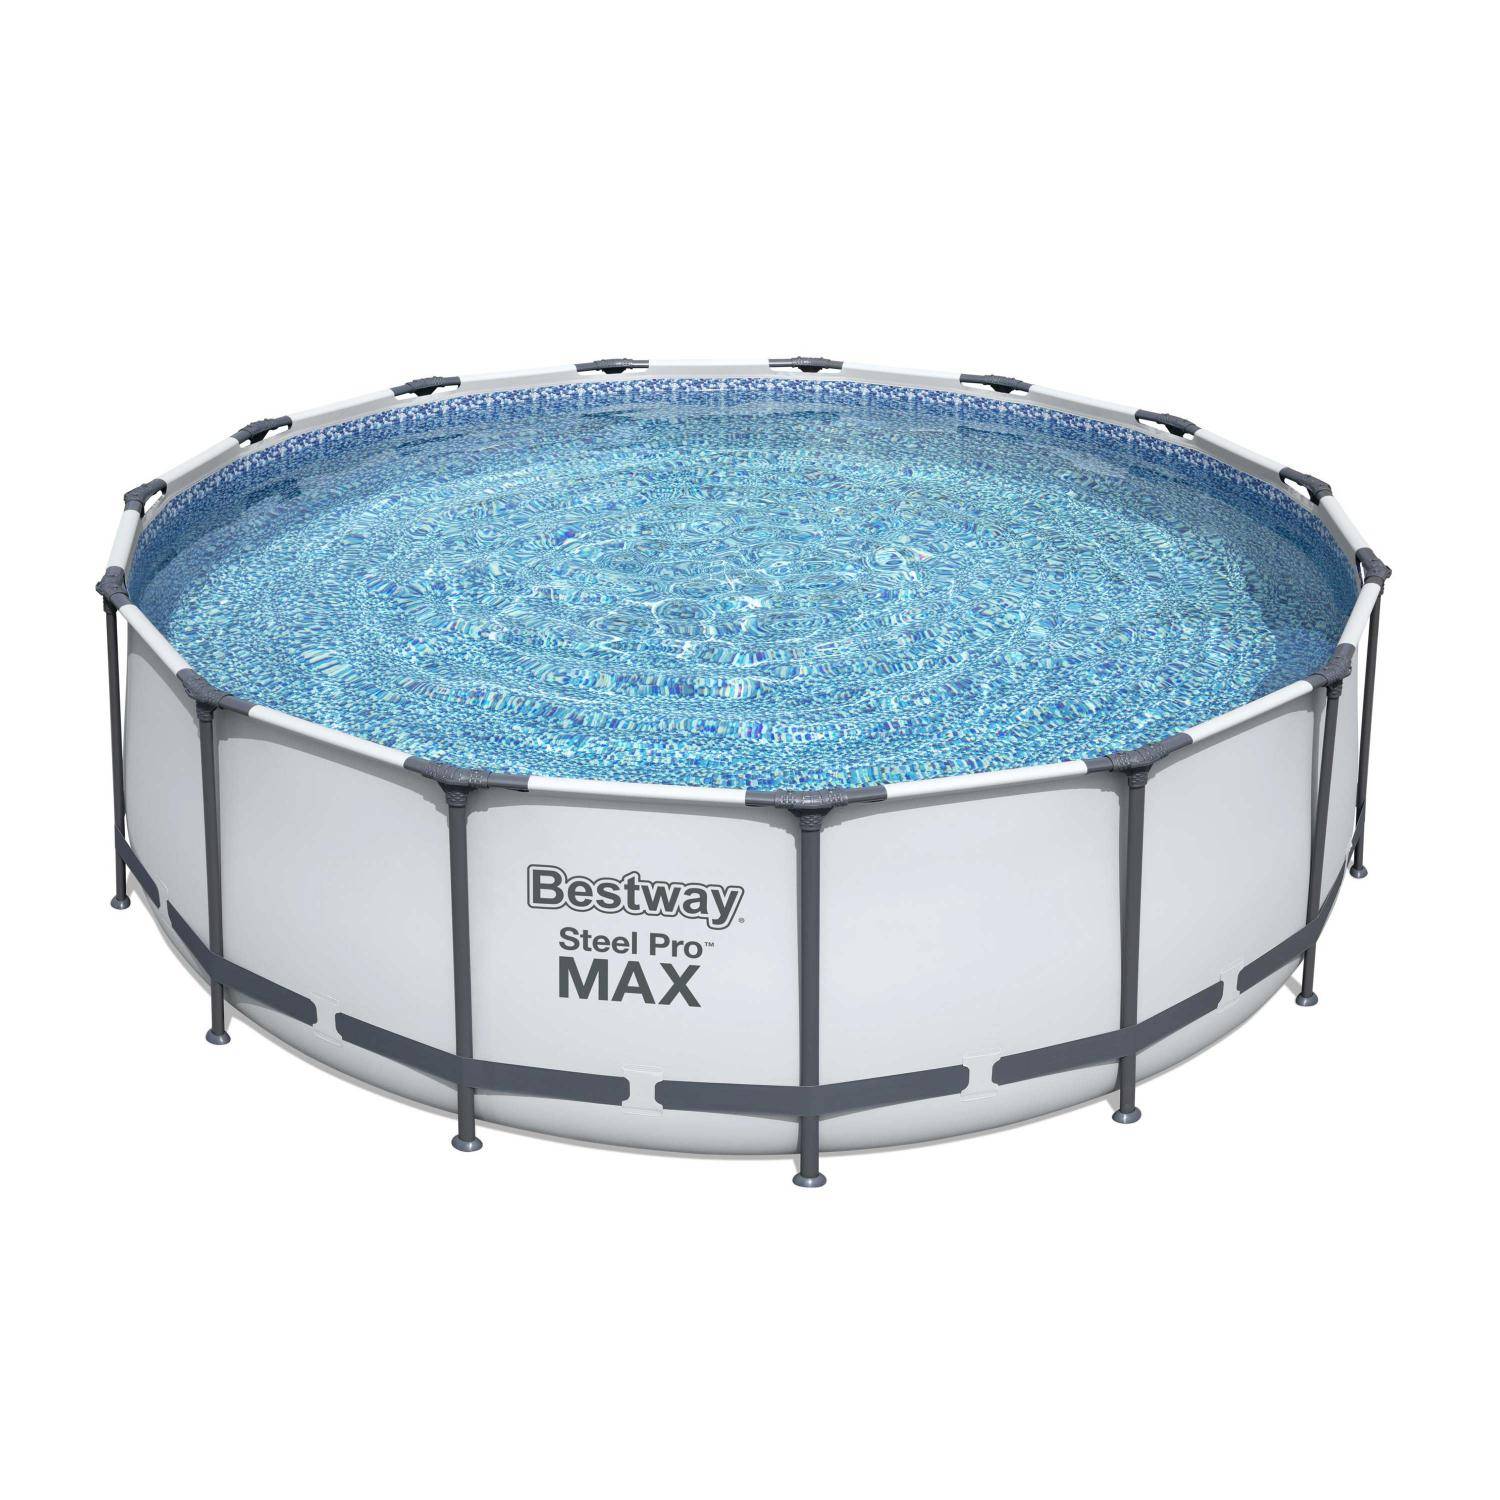 15ft round tubular above-ground swimming pool with filter pump, steel frame, repair kit, 457 x 122 cm - Bestway Come - Grey Photo1